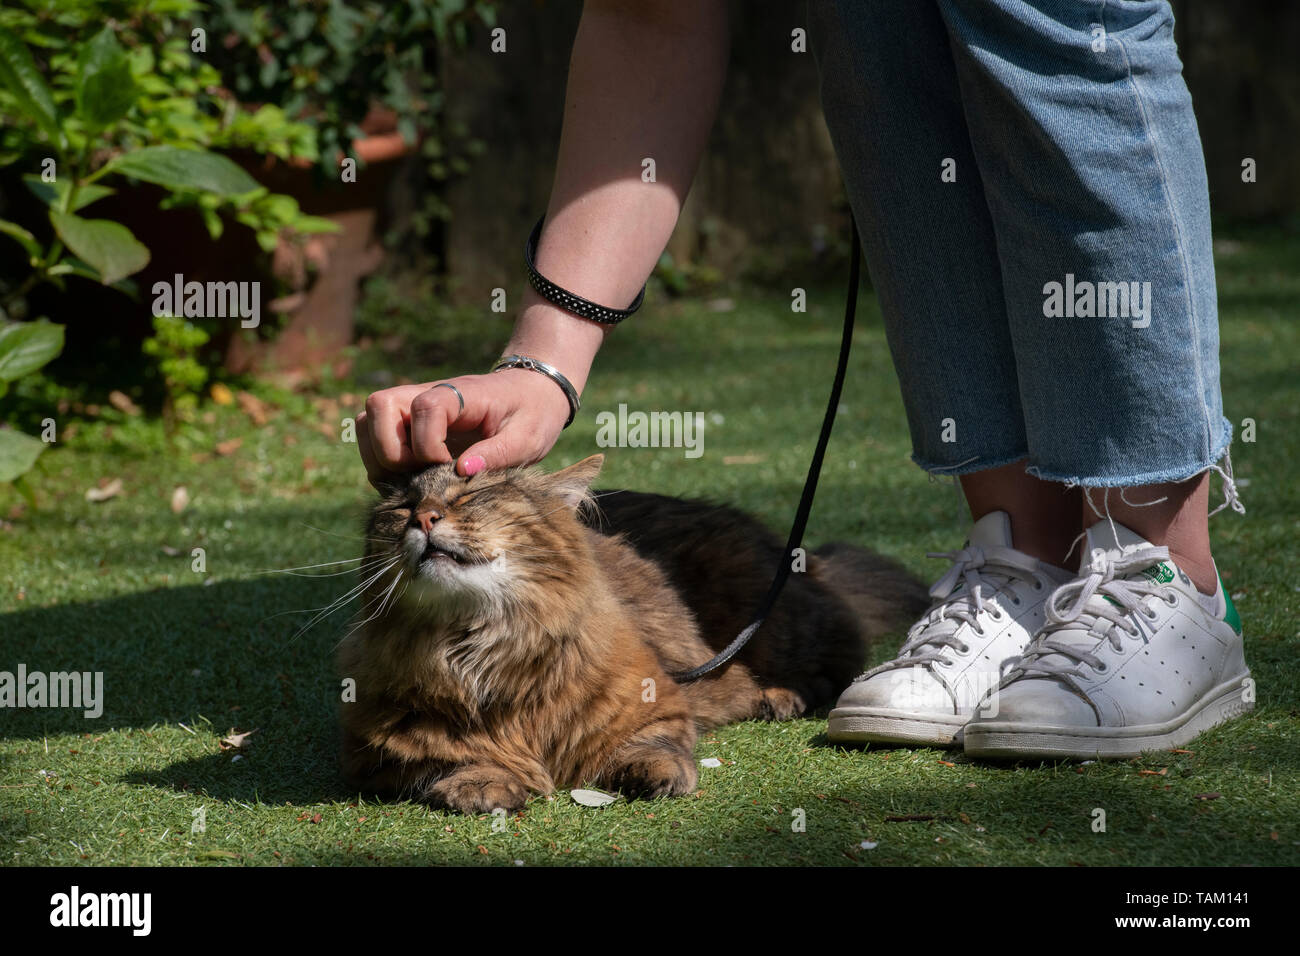 A munchkin cat on a lead is taken for a walk outside by its owner Stock Photo